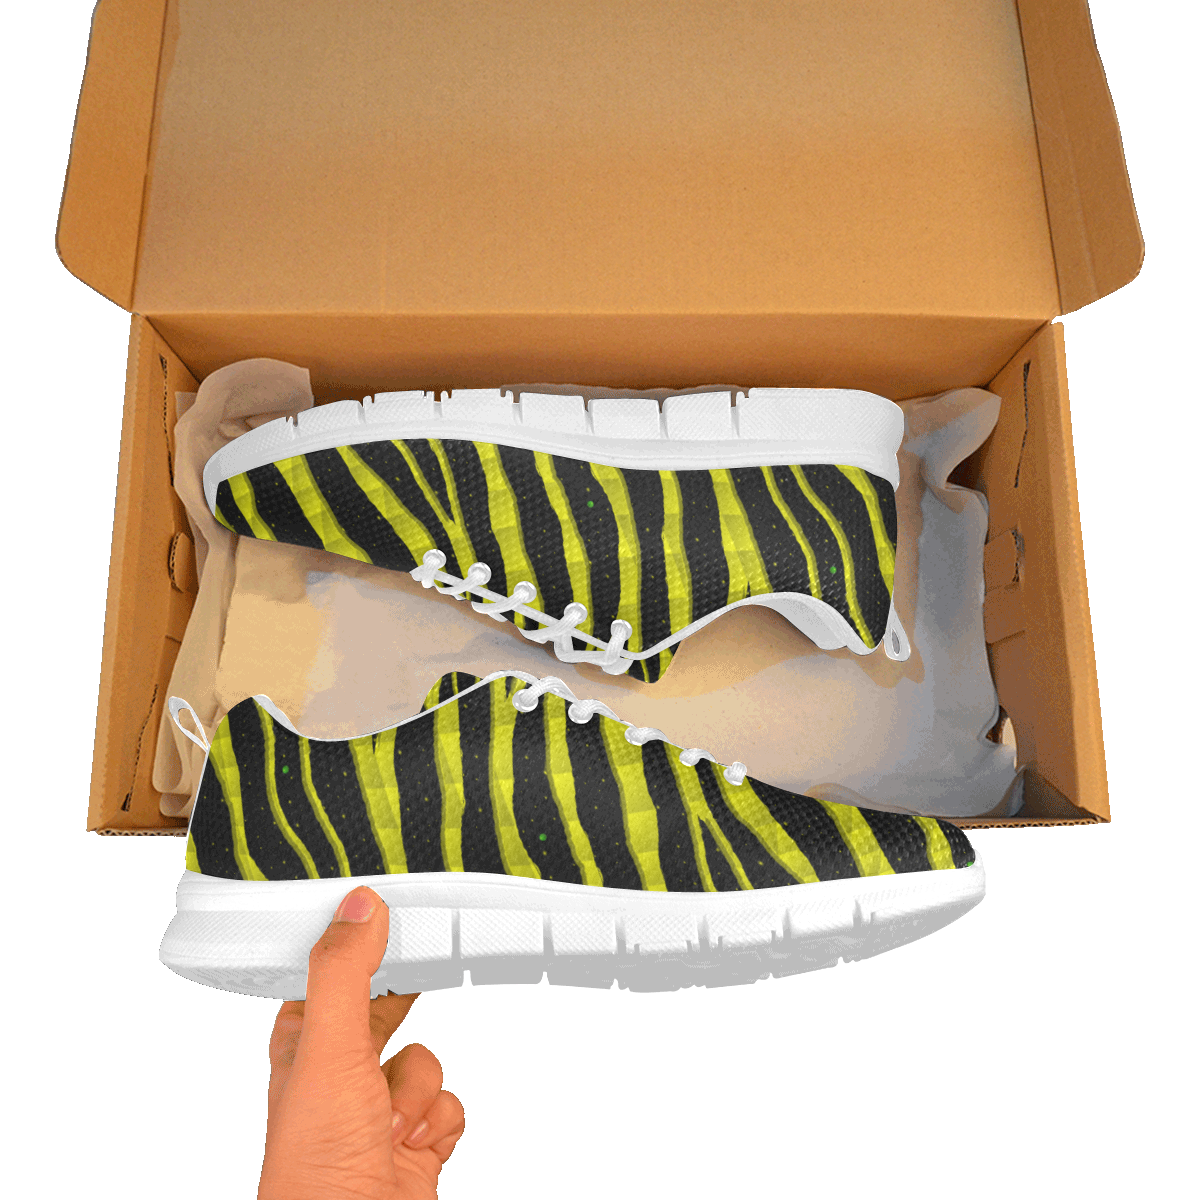 Ripped SpaceTime Stripes - Yellow Women's Breathable Running Shoes (Model 055)